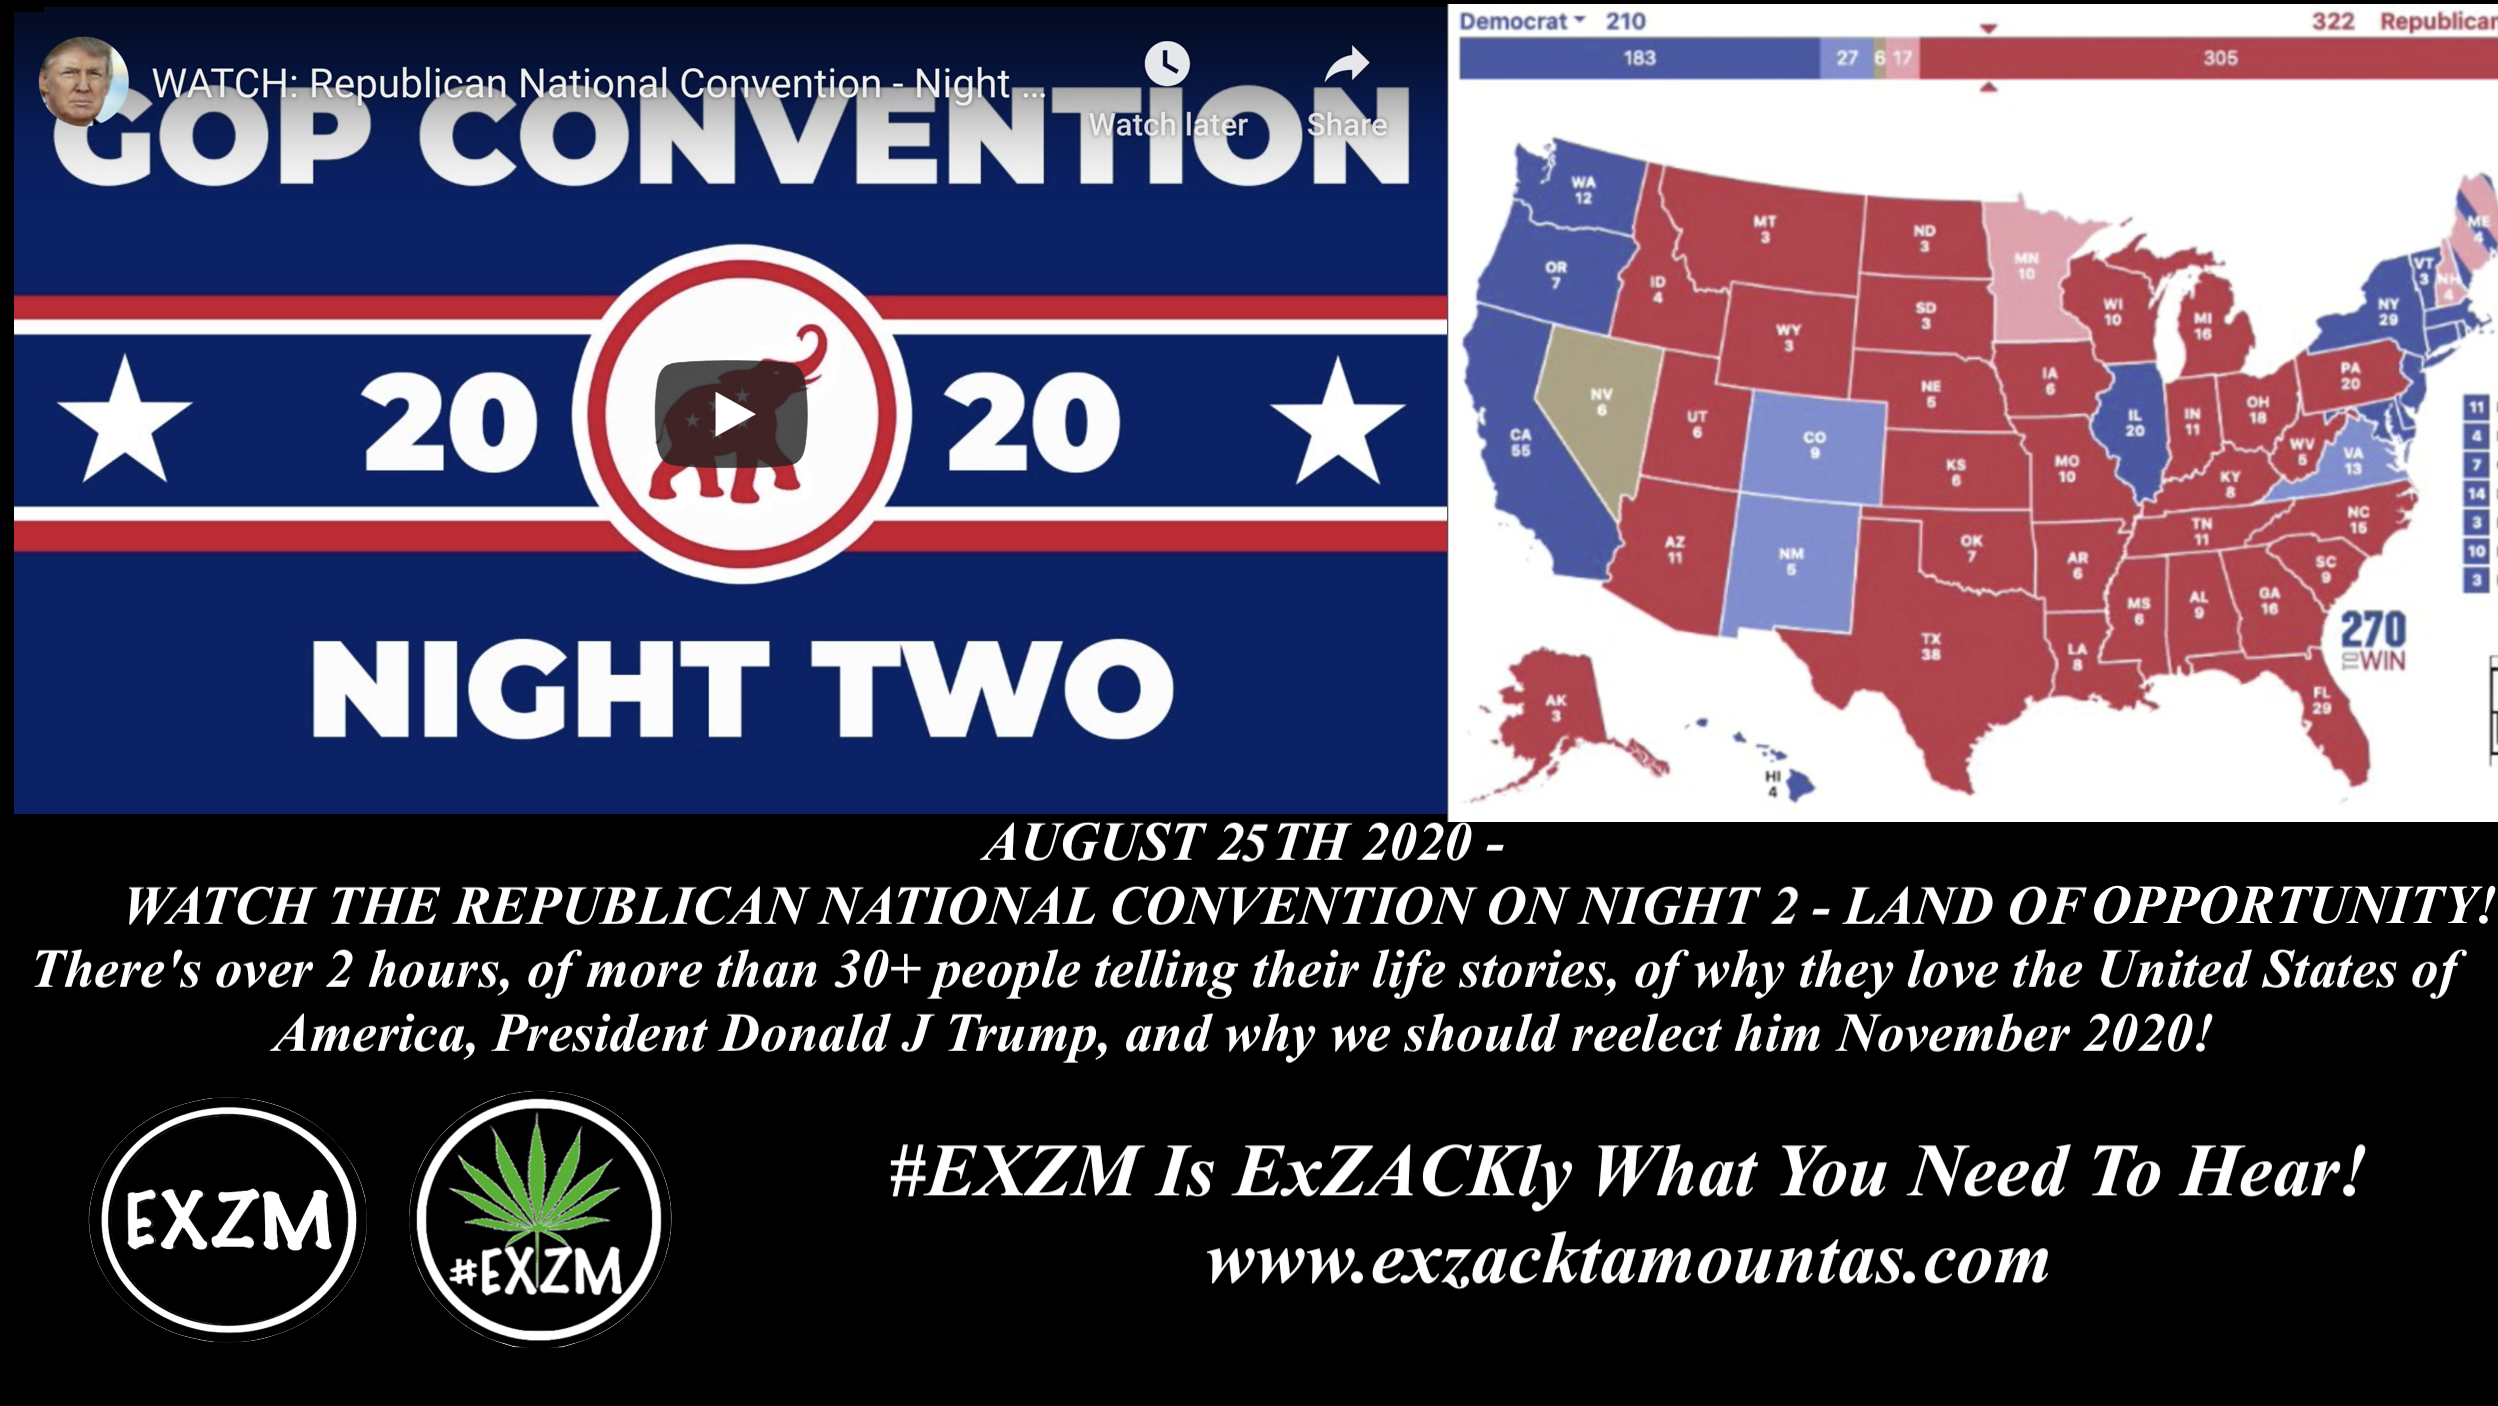 EXZM President Donald Trump RNC Republican National Convention August 25th 2020 Night 2 copy